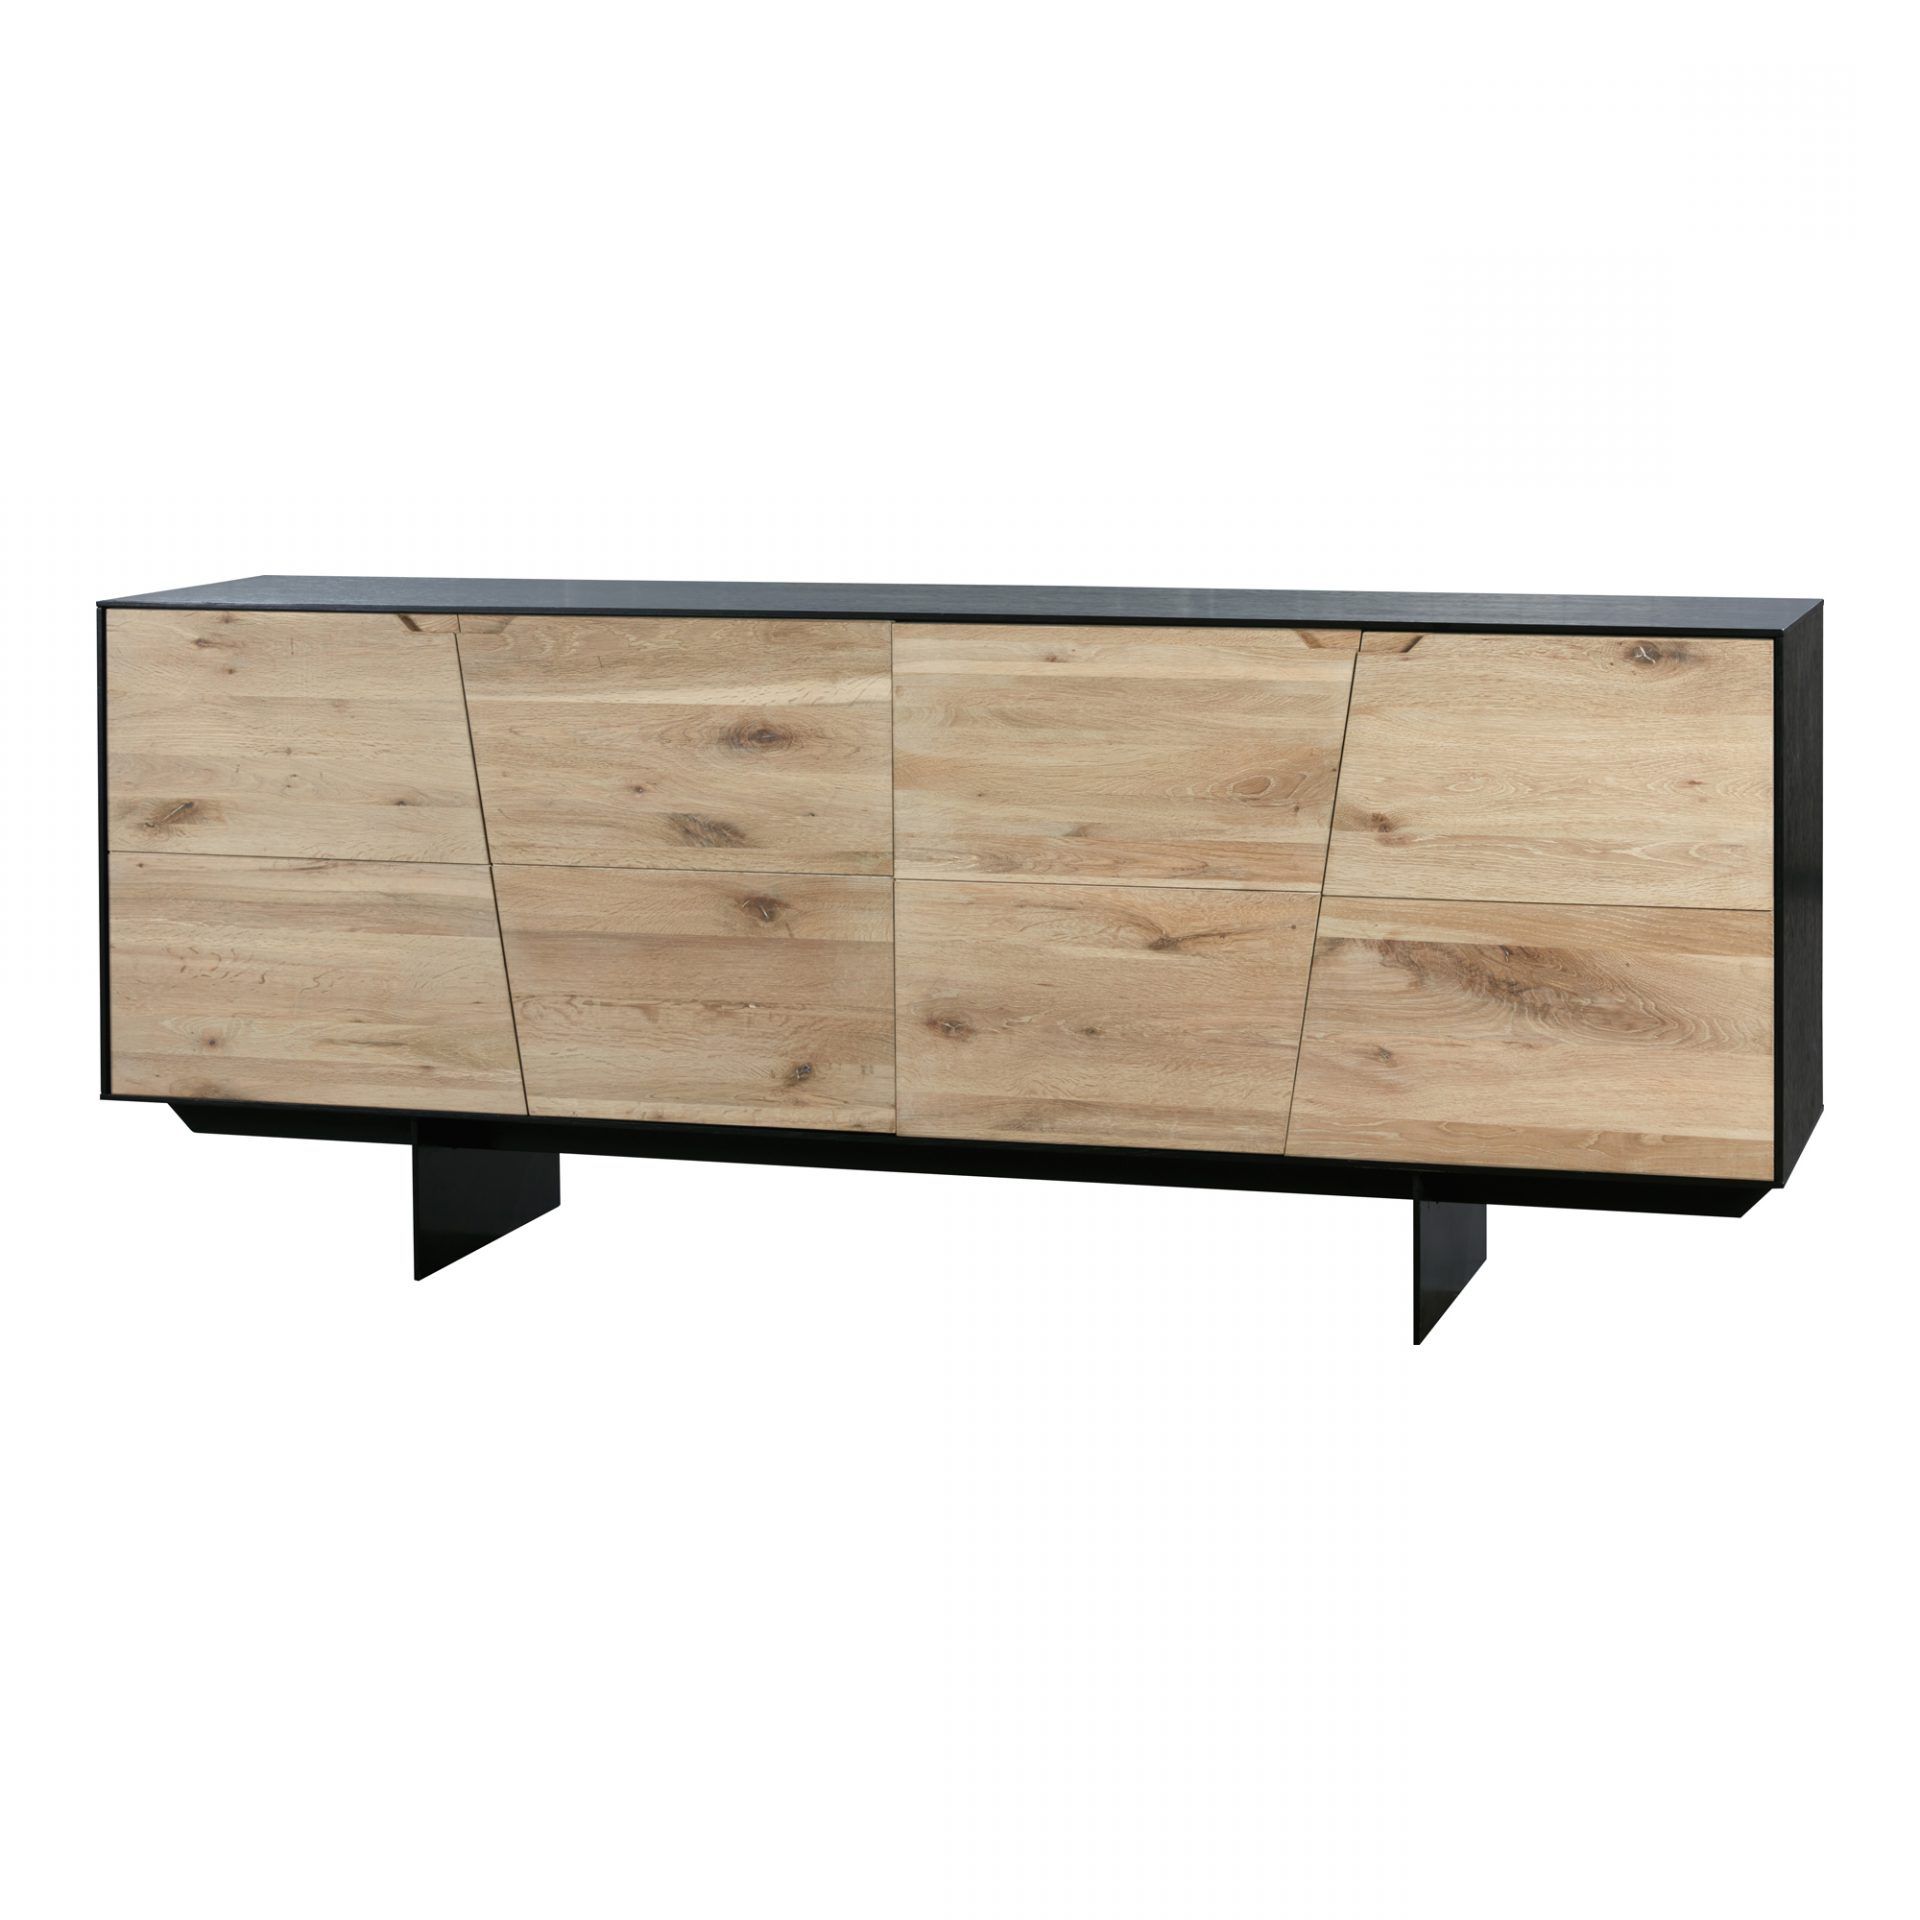 Sideboards & Storage | Categories | Moe's Wholesale Throughout Solid Wood Contemporary Sideboards Buffets (View 10 of 20)